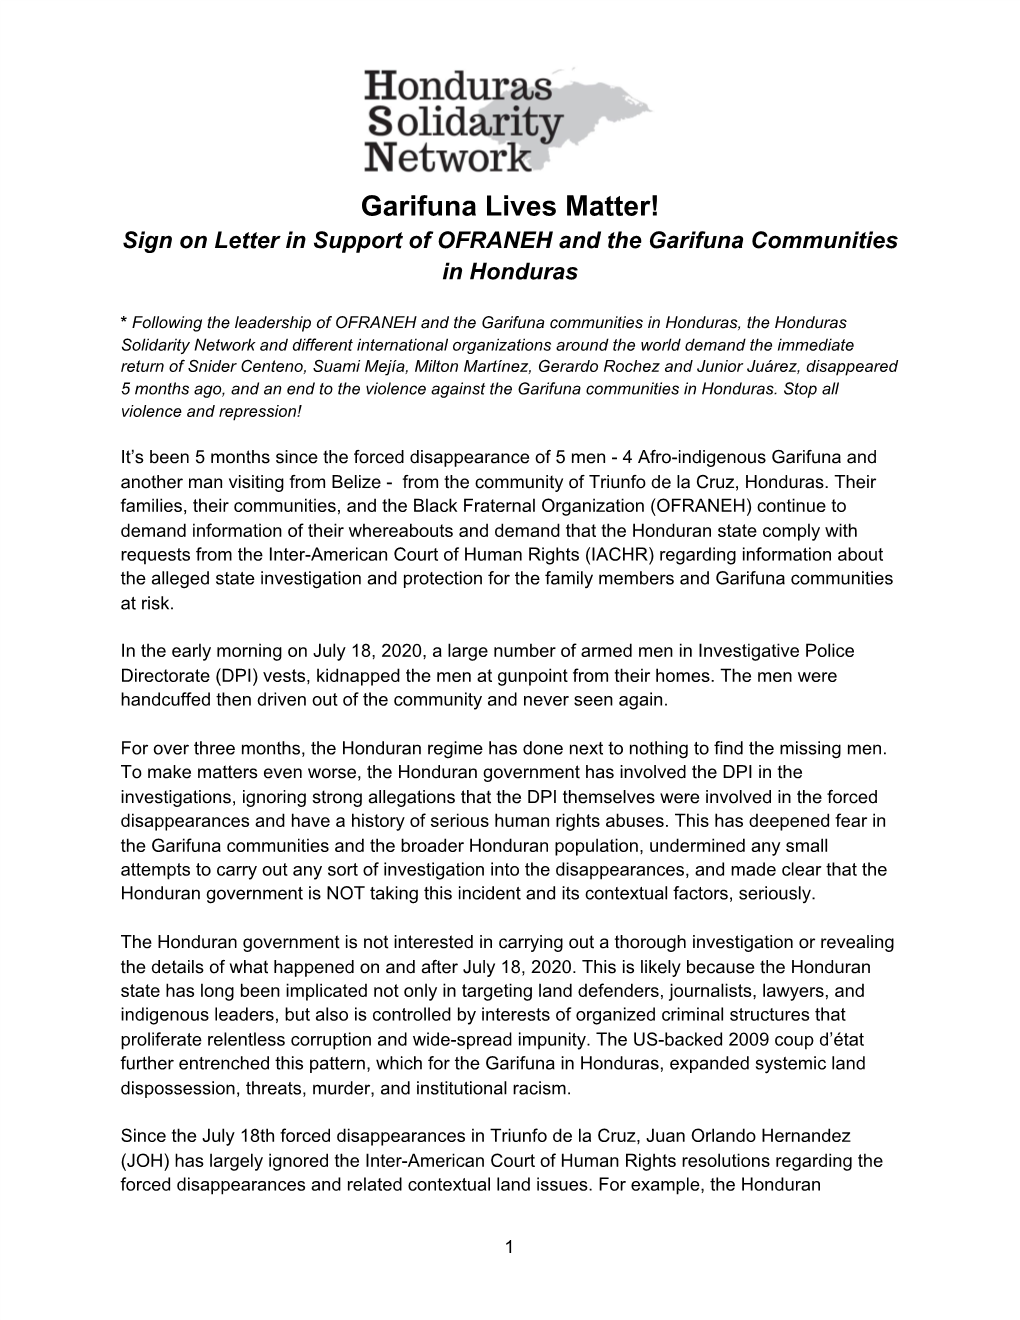 Garifuna Lives Matter! Sign on Letter in Support of OFRANEH and the Garifuna Communities in Honduras